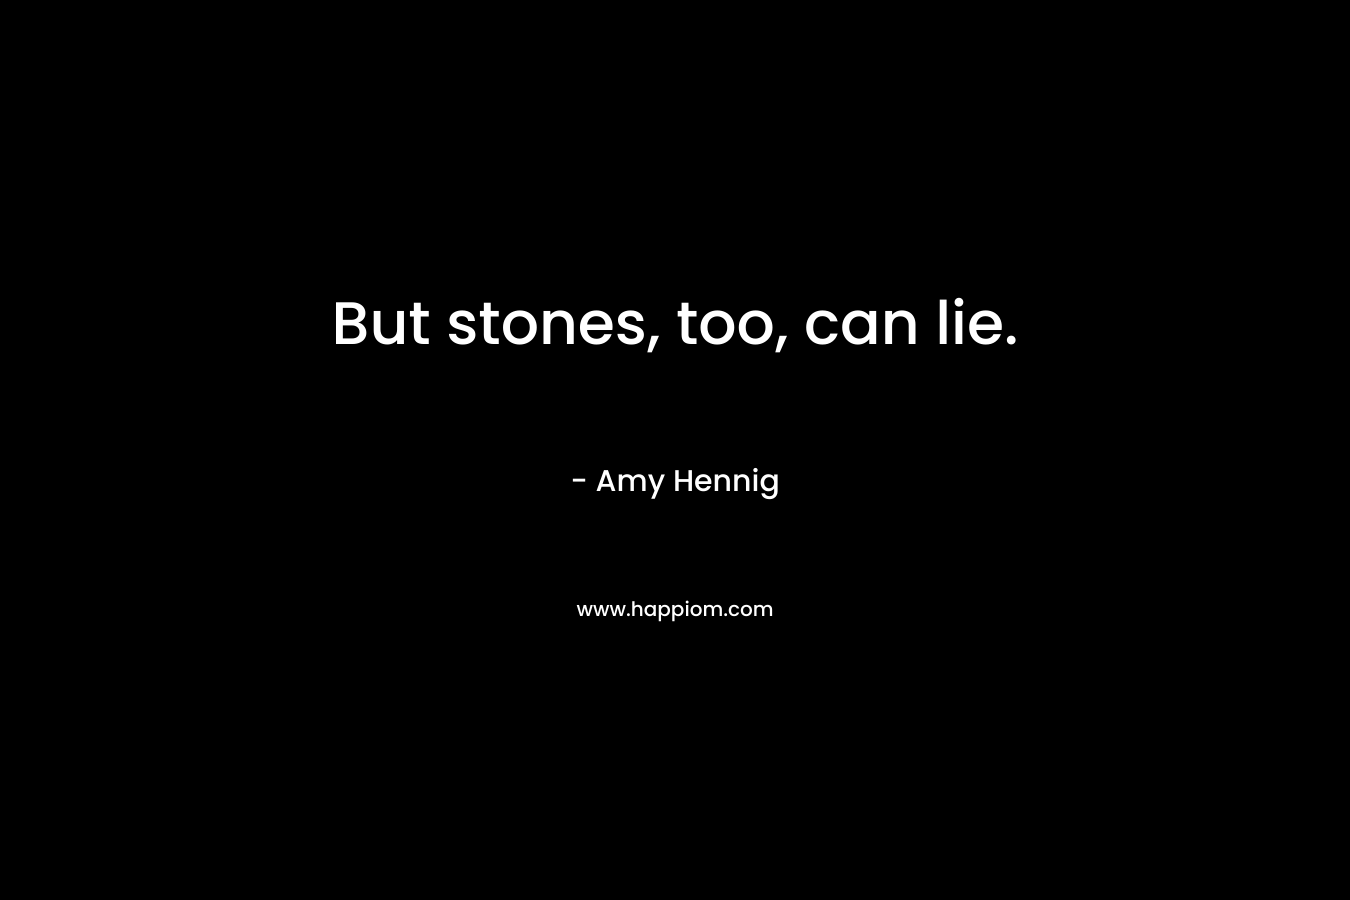 But stones, too, can lie. – Amy Hennig